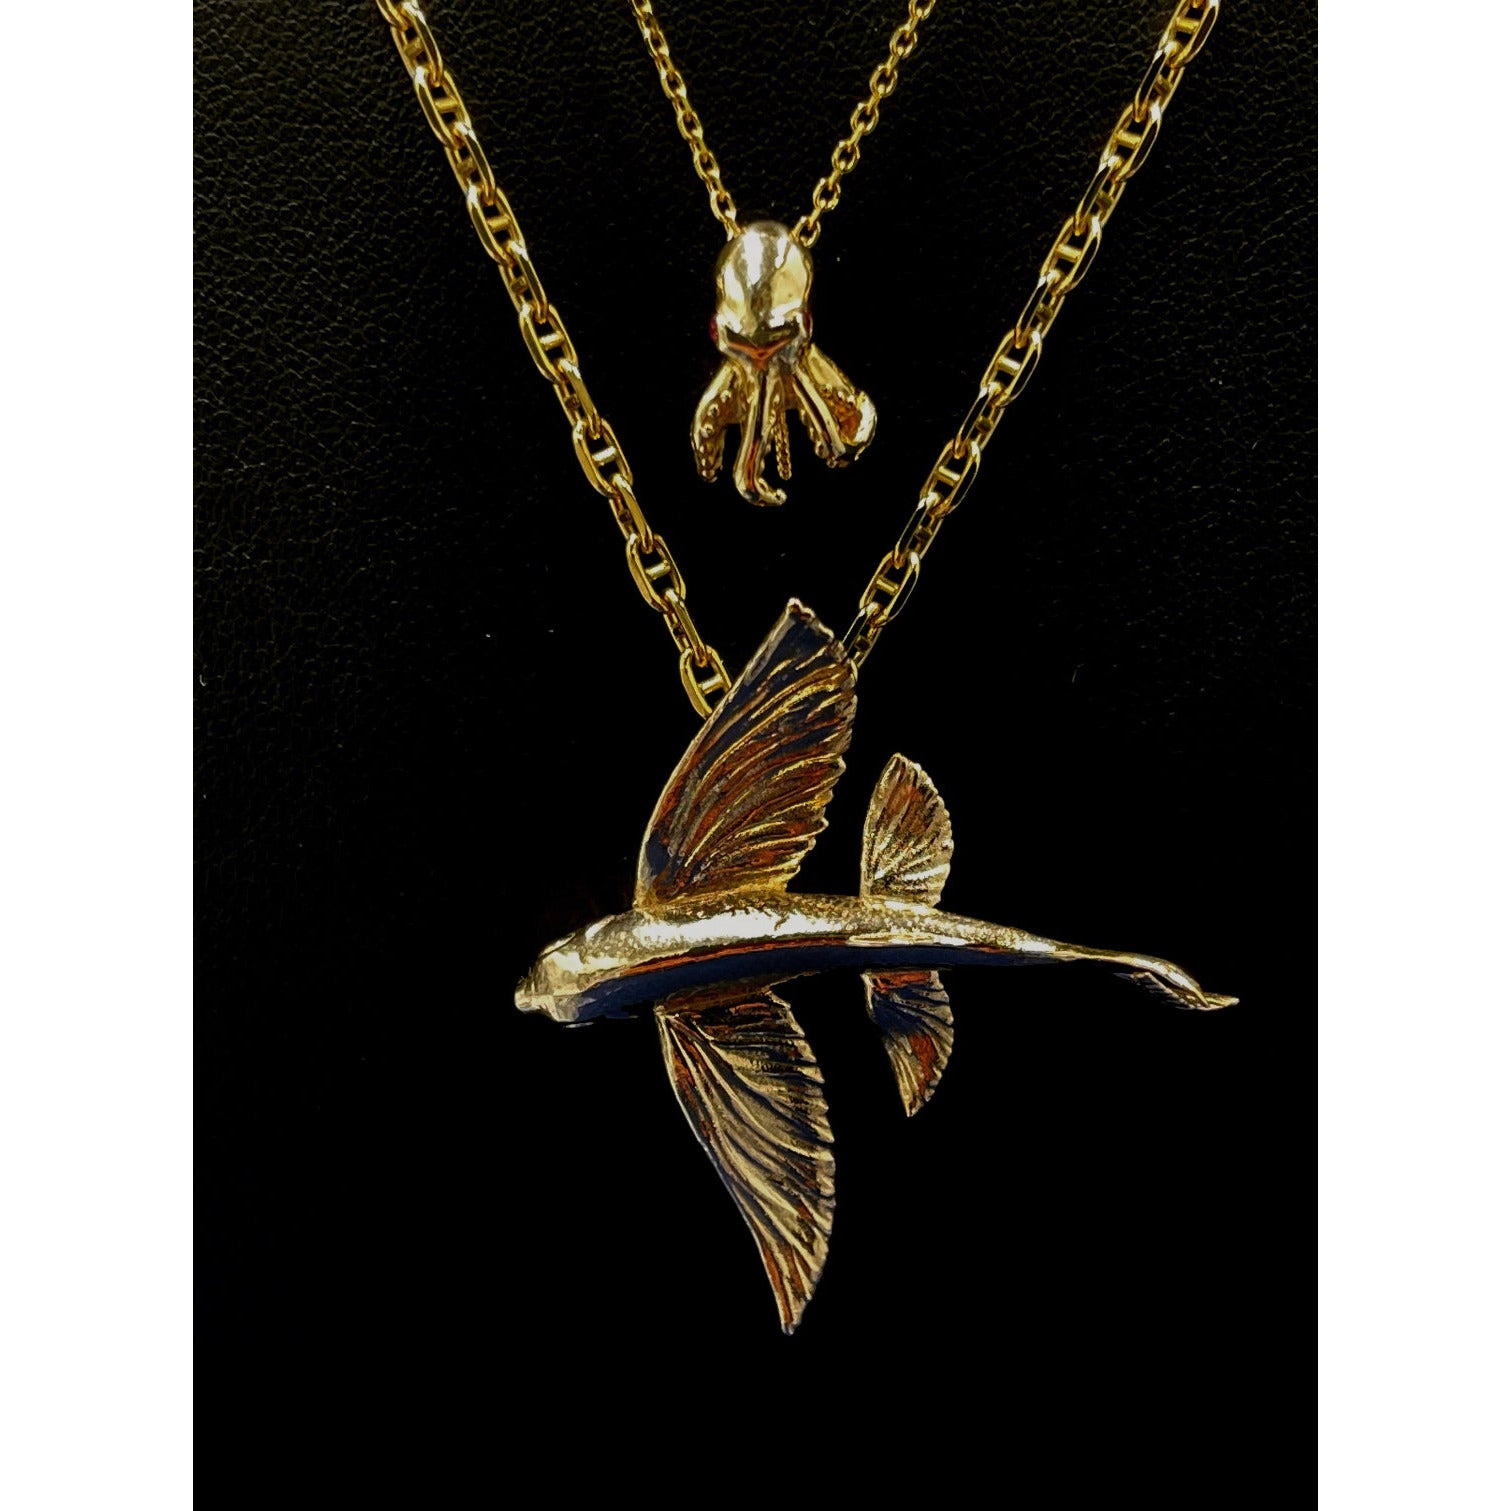 Solid 14k Gold Flying Fish Pendant and Octopus Pendant